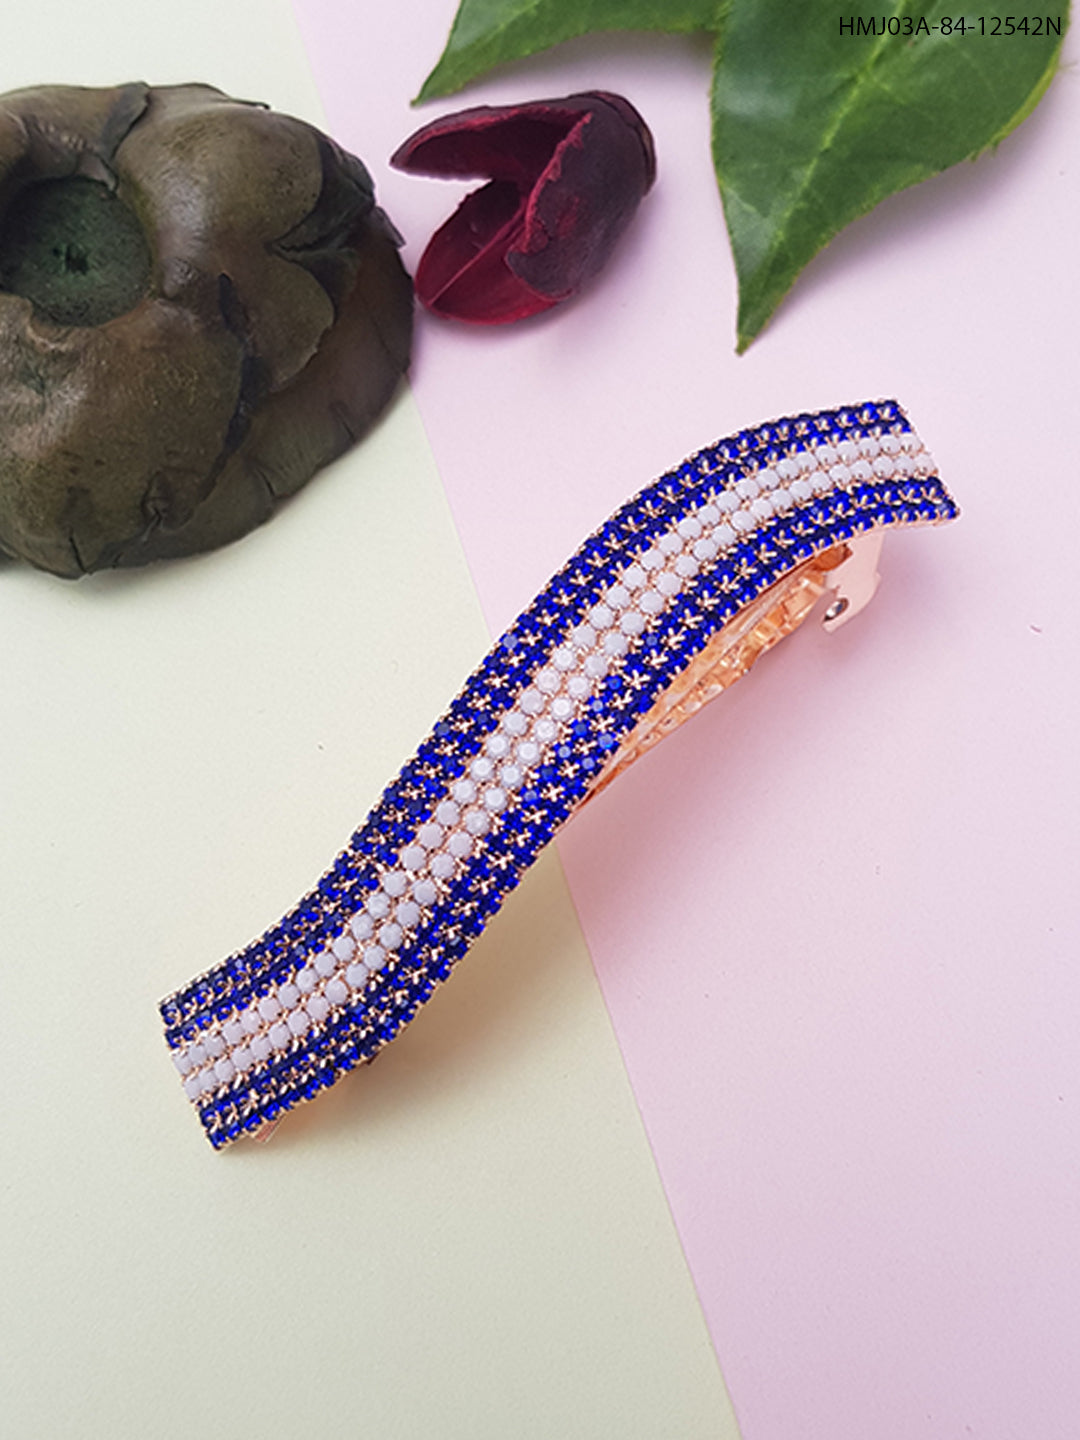 Designer Hair Clips with CZ stones 12542N